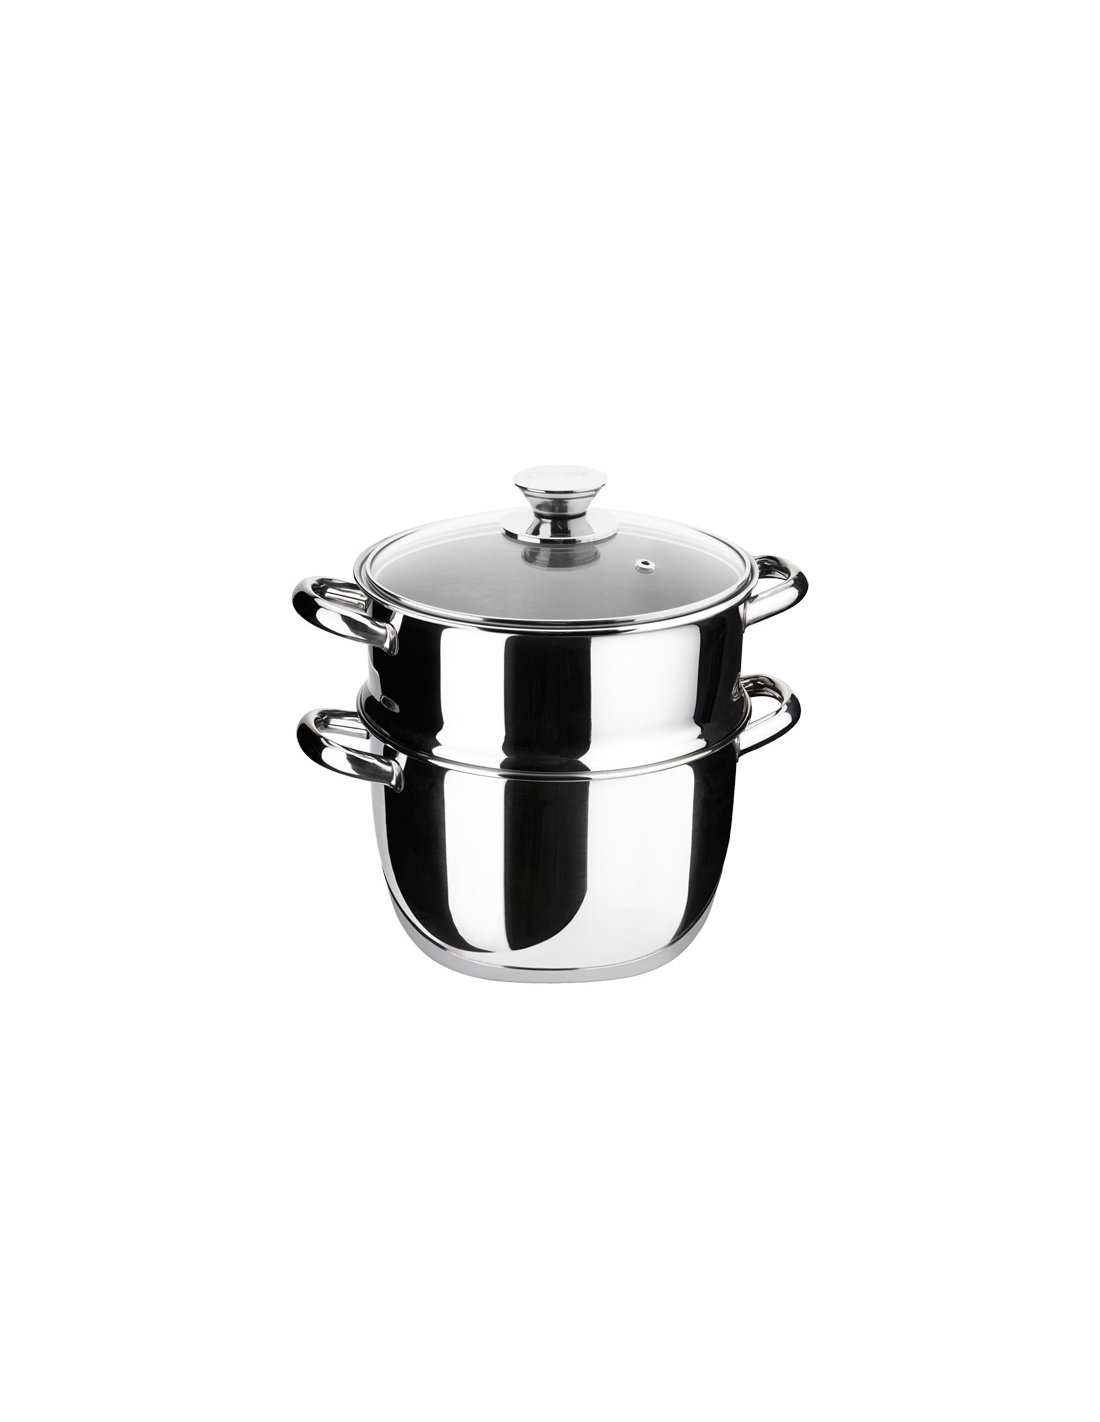 3 Level Steam Kitchens Pot Kit with Glass Lid Stainless Steel Steam Cooking Pot Set 28cm Steam Cooker Set 